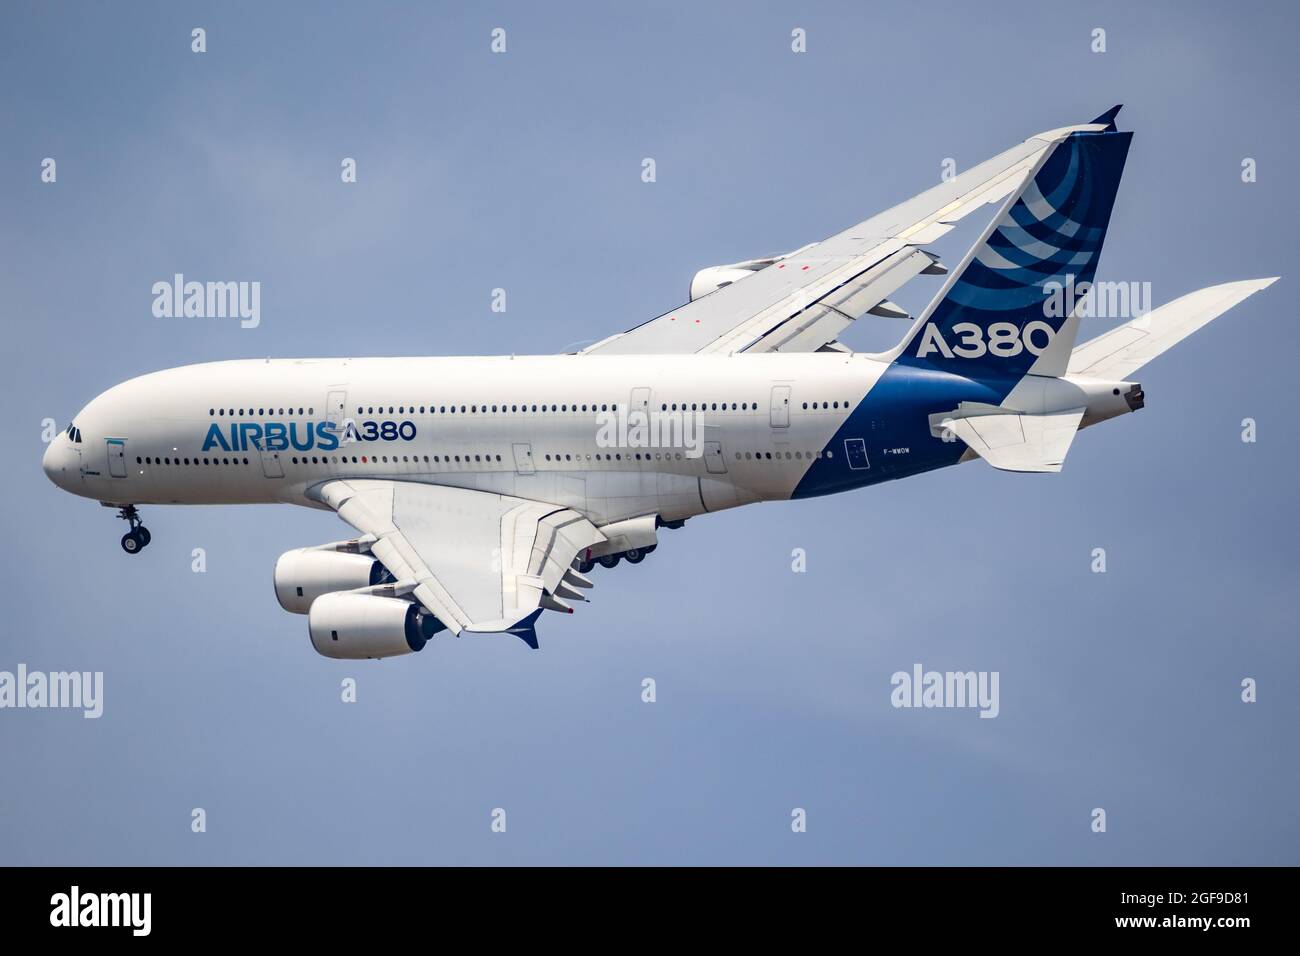 Airbus A380 double-decker passenger plane in flight during the Paris Air Show. France - June 22, 2017 Stock Photo